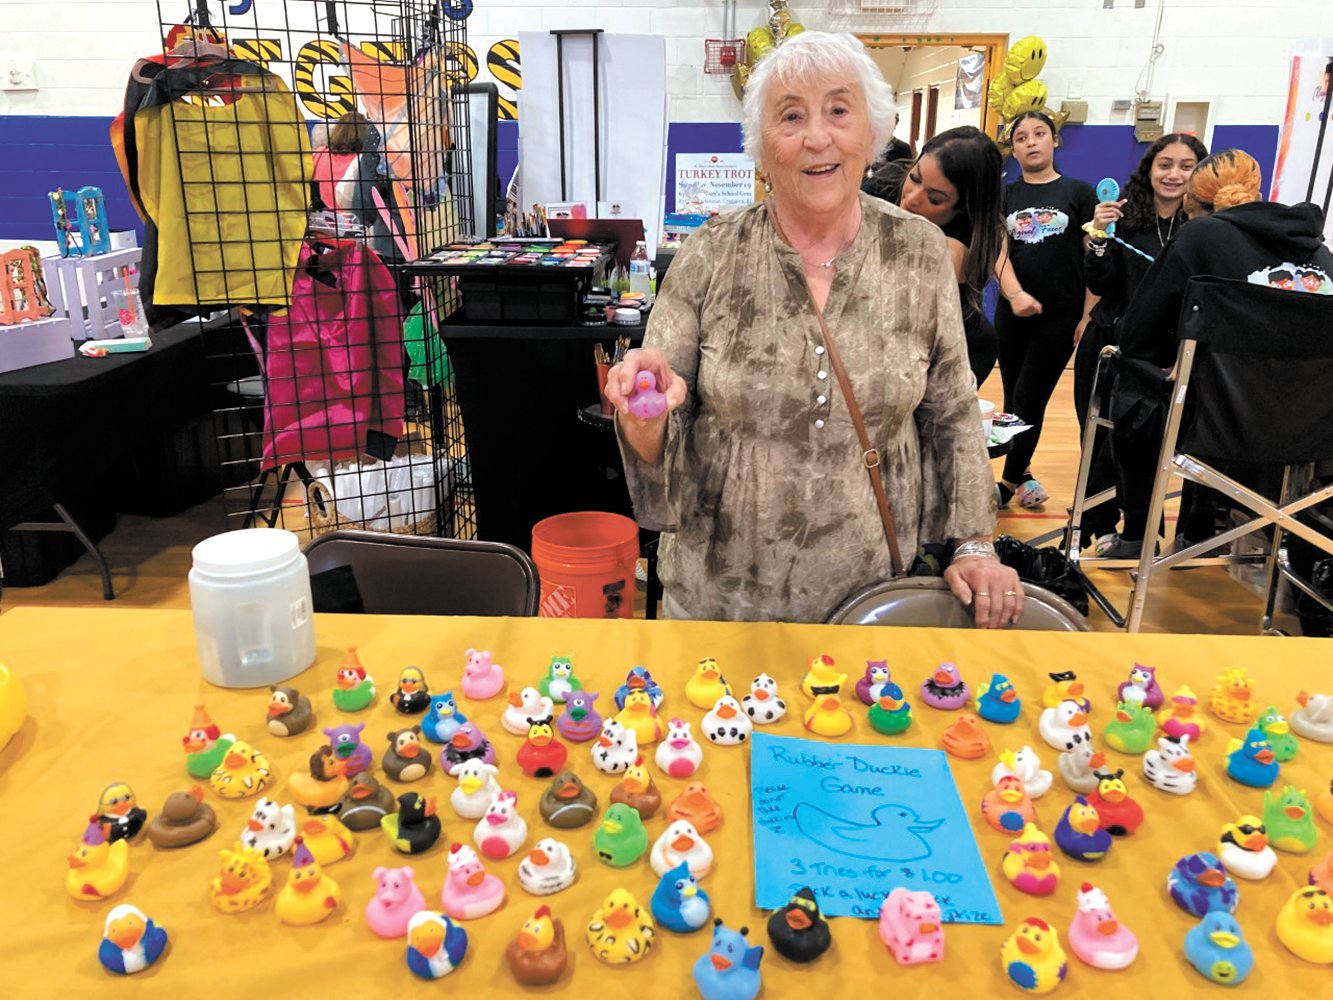 A GAME OF DUCKS: Ann Marie Mullaney ran a rubber duckie game at Saturday’s event. For $1, individuals had three tries to pick the lucky duck with the number on the bottom of it. If you had the correct pick, you won a prize!